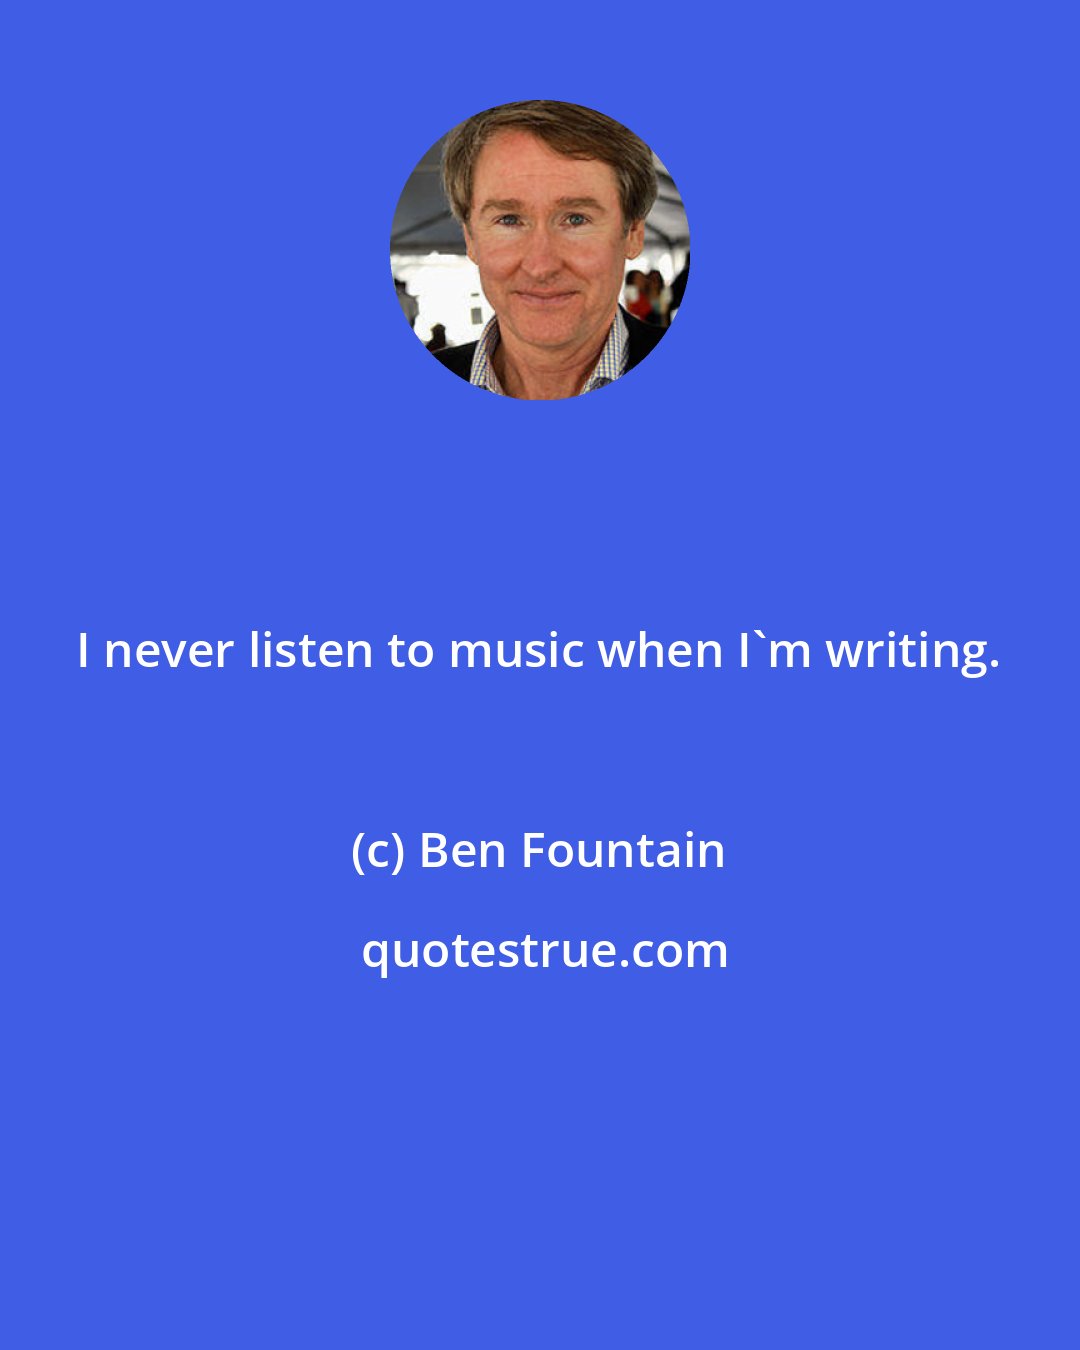 Ben Fountain: I never listen to music when I'm writing.